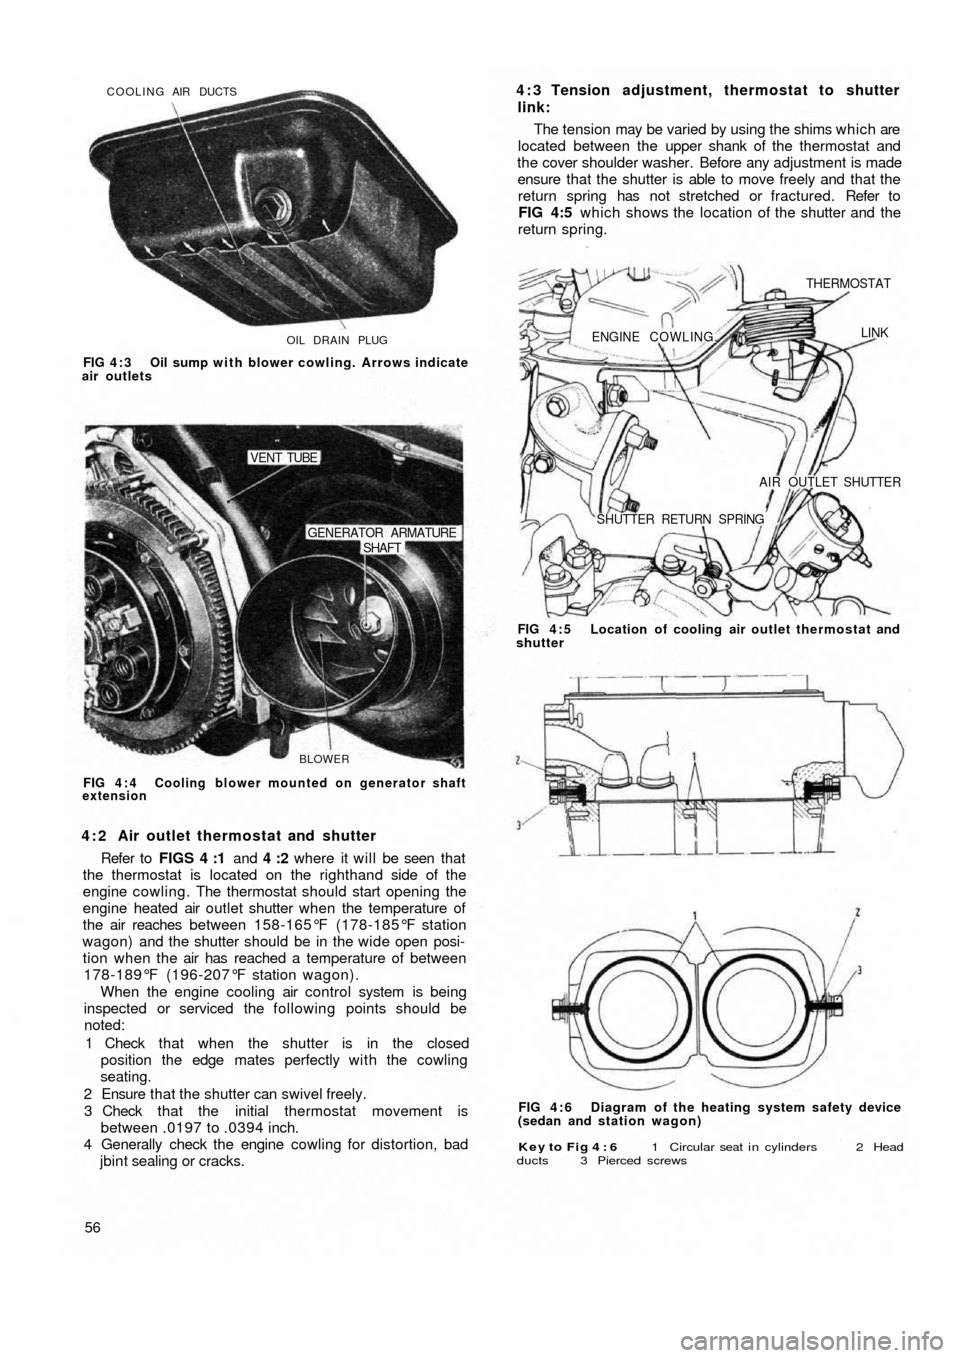 FIAT 500 1965 1.G Workshop Manual OIL DRAIN PLUG COOLING AIR DUCTS
FIG 4 : 3  Oil sump with blower cowling. Arrows indicate
air outlets
BLOWER
SHAFT GENERATOR ARMATURE
VENT TUBE
FIG 4 : 4  Cooling blower mounted on generator shaft
ext